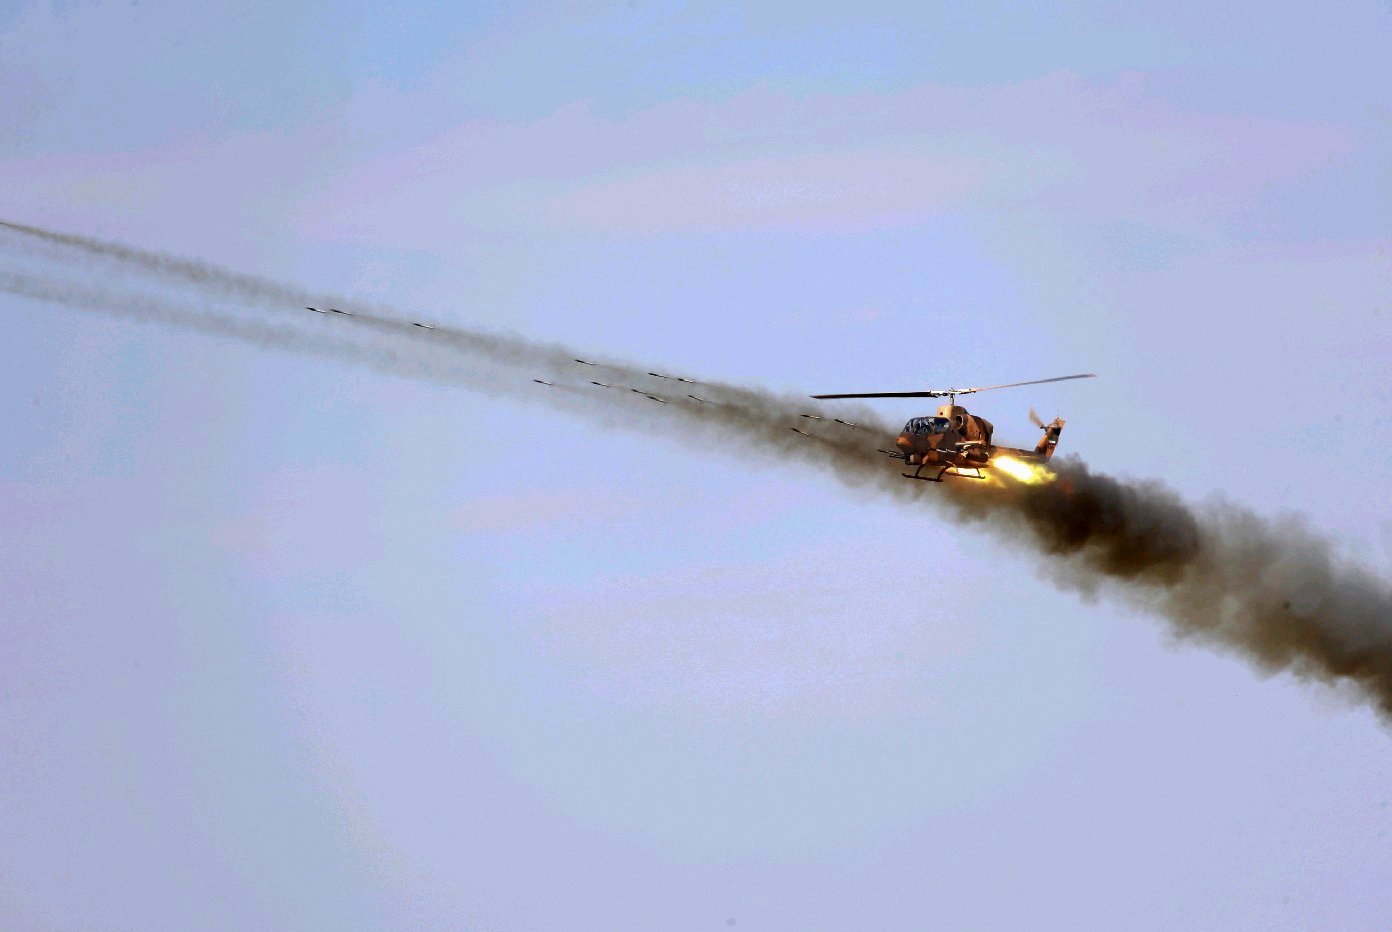 An Iranian army helicopter maneuvers during a military exercise in the northwest of the country, close to the Iranian-Azerbaijani border, Oct. 1, 2021. (Iranian Army Office via AFP)